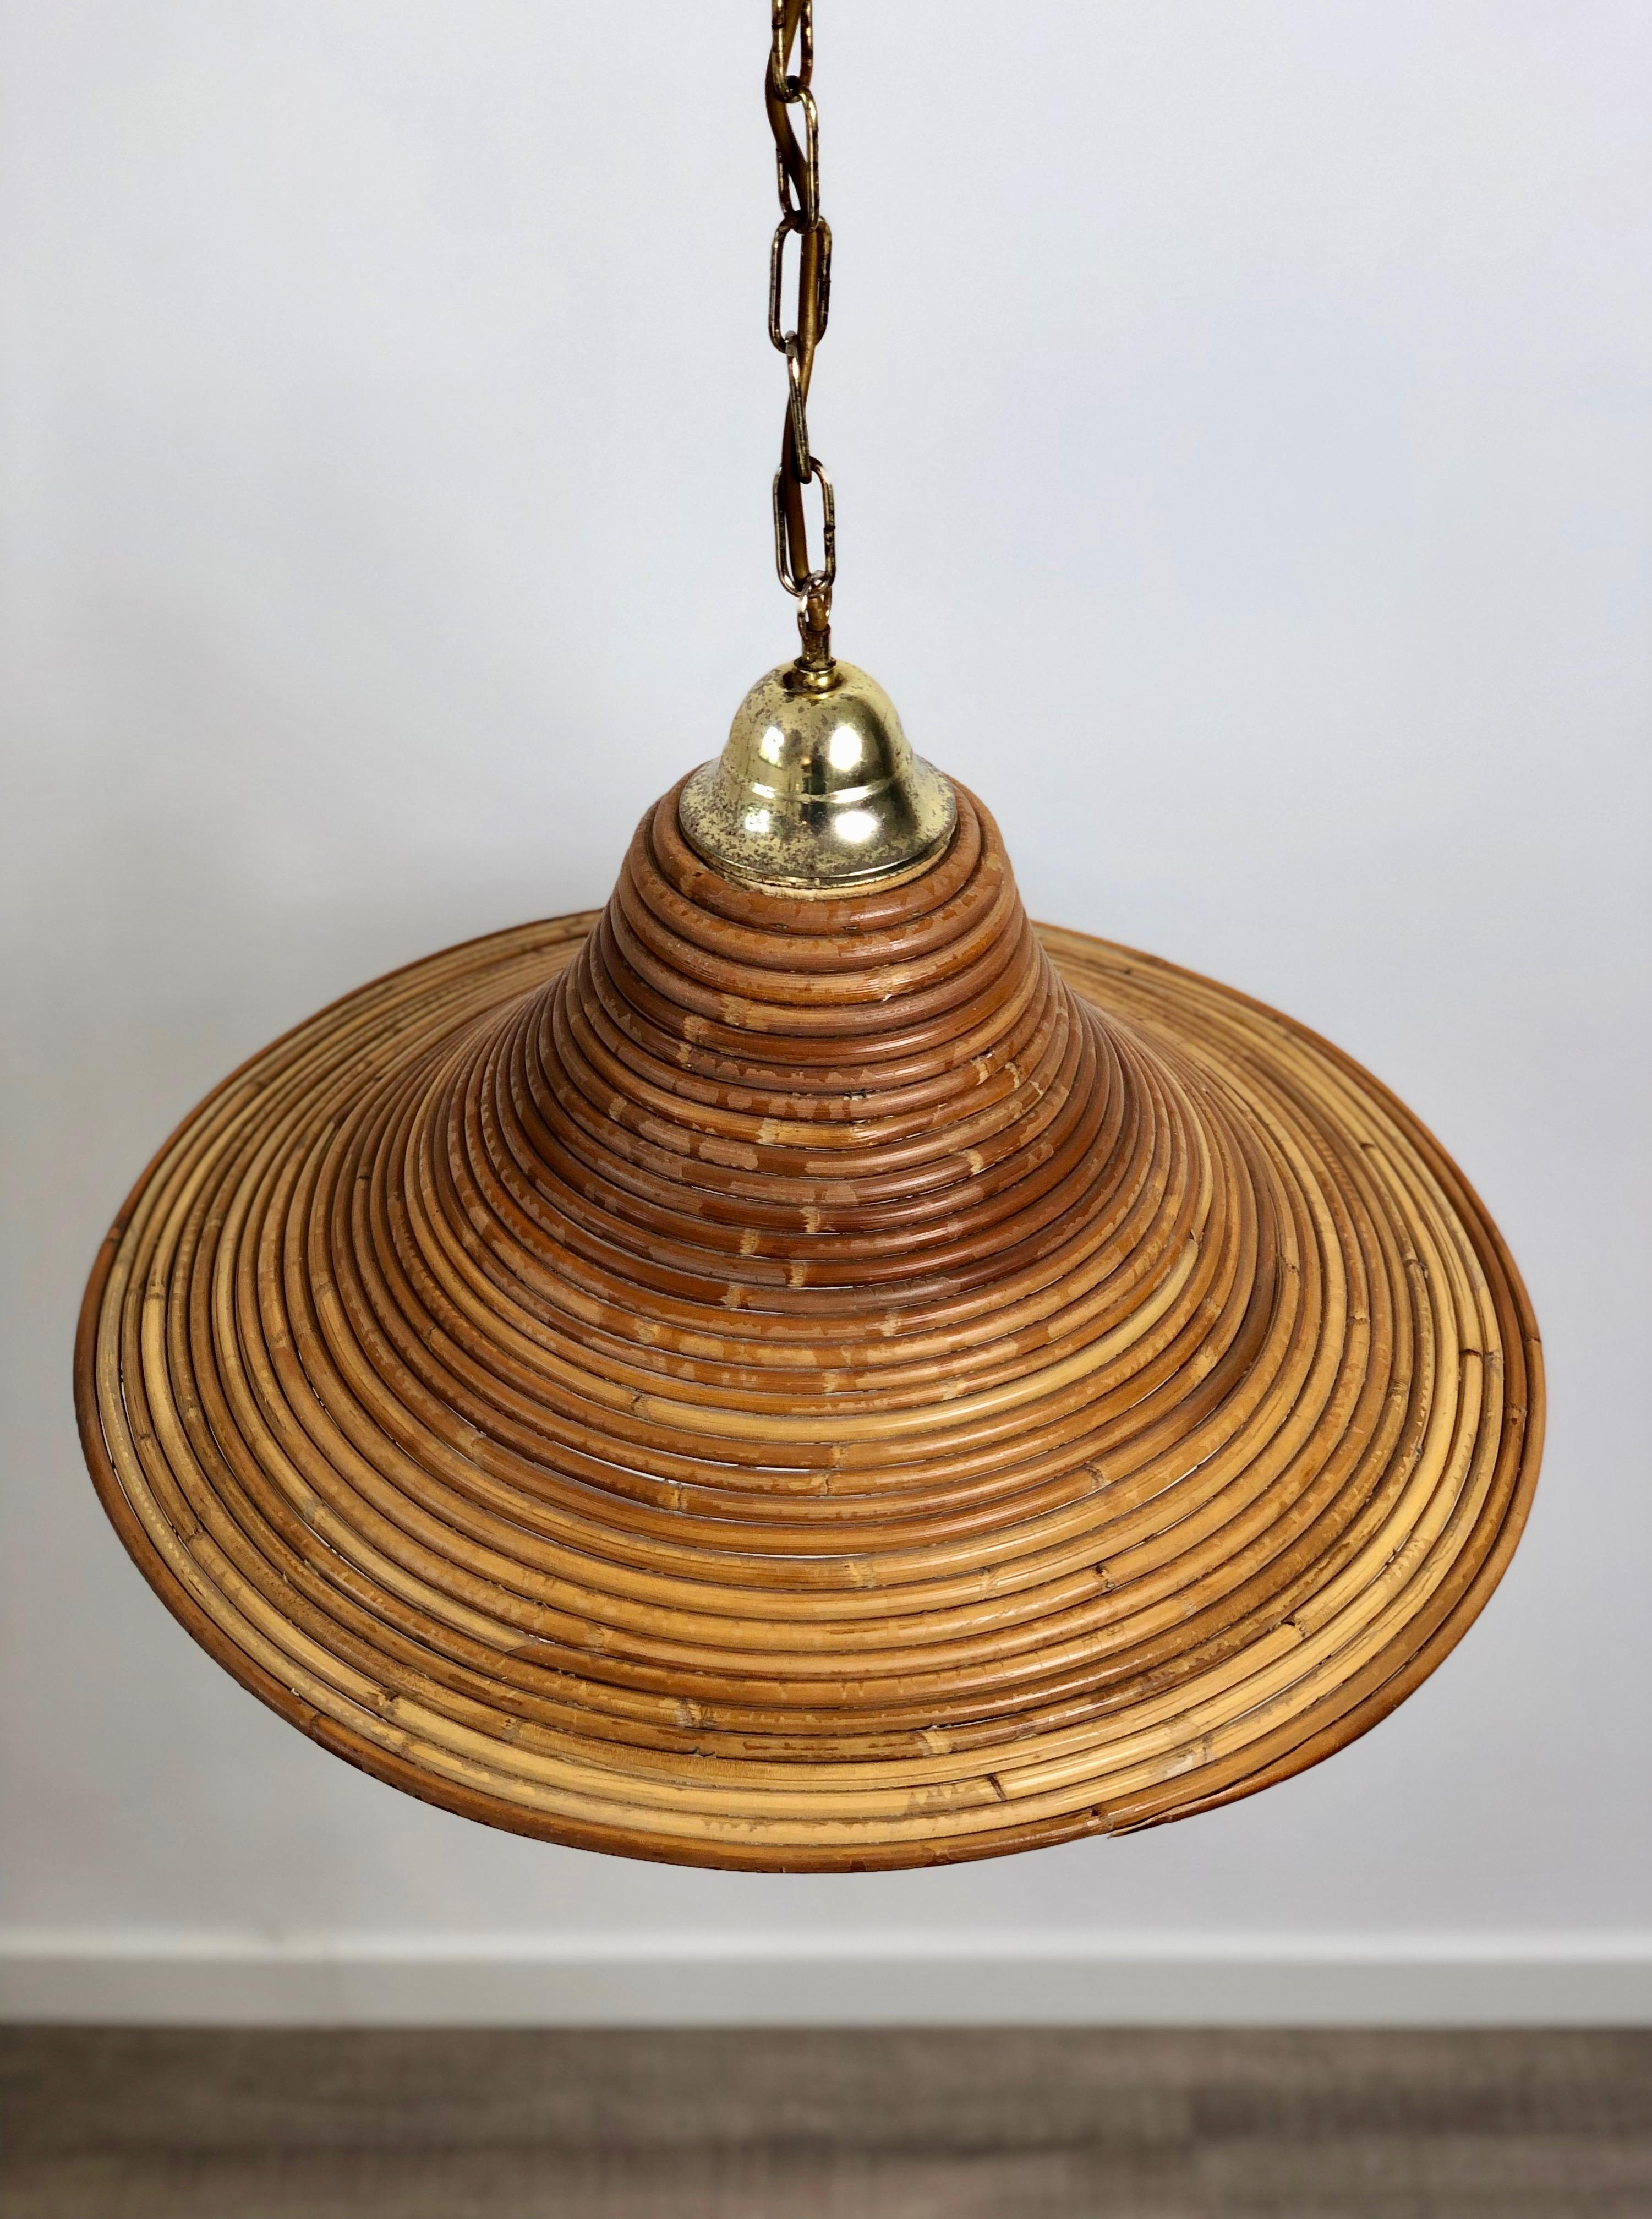 Beautiful midcentury pendant lamp handcrafted in Italy. This lamp is a striking appearance in any room. It is a perfect representation of the 1950s period because of its design, quality and functionality. 
The lamp is made of bamboo and polished